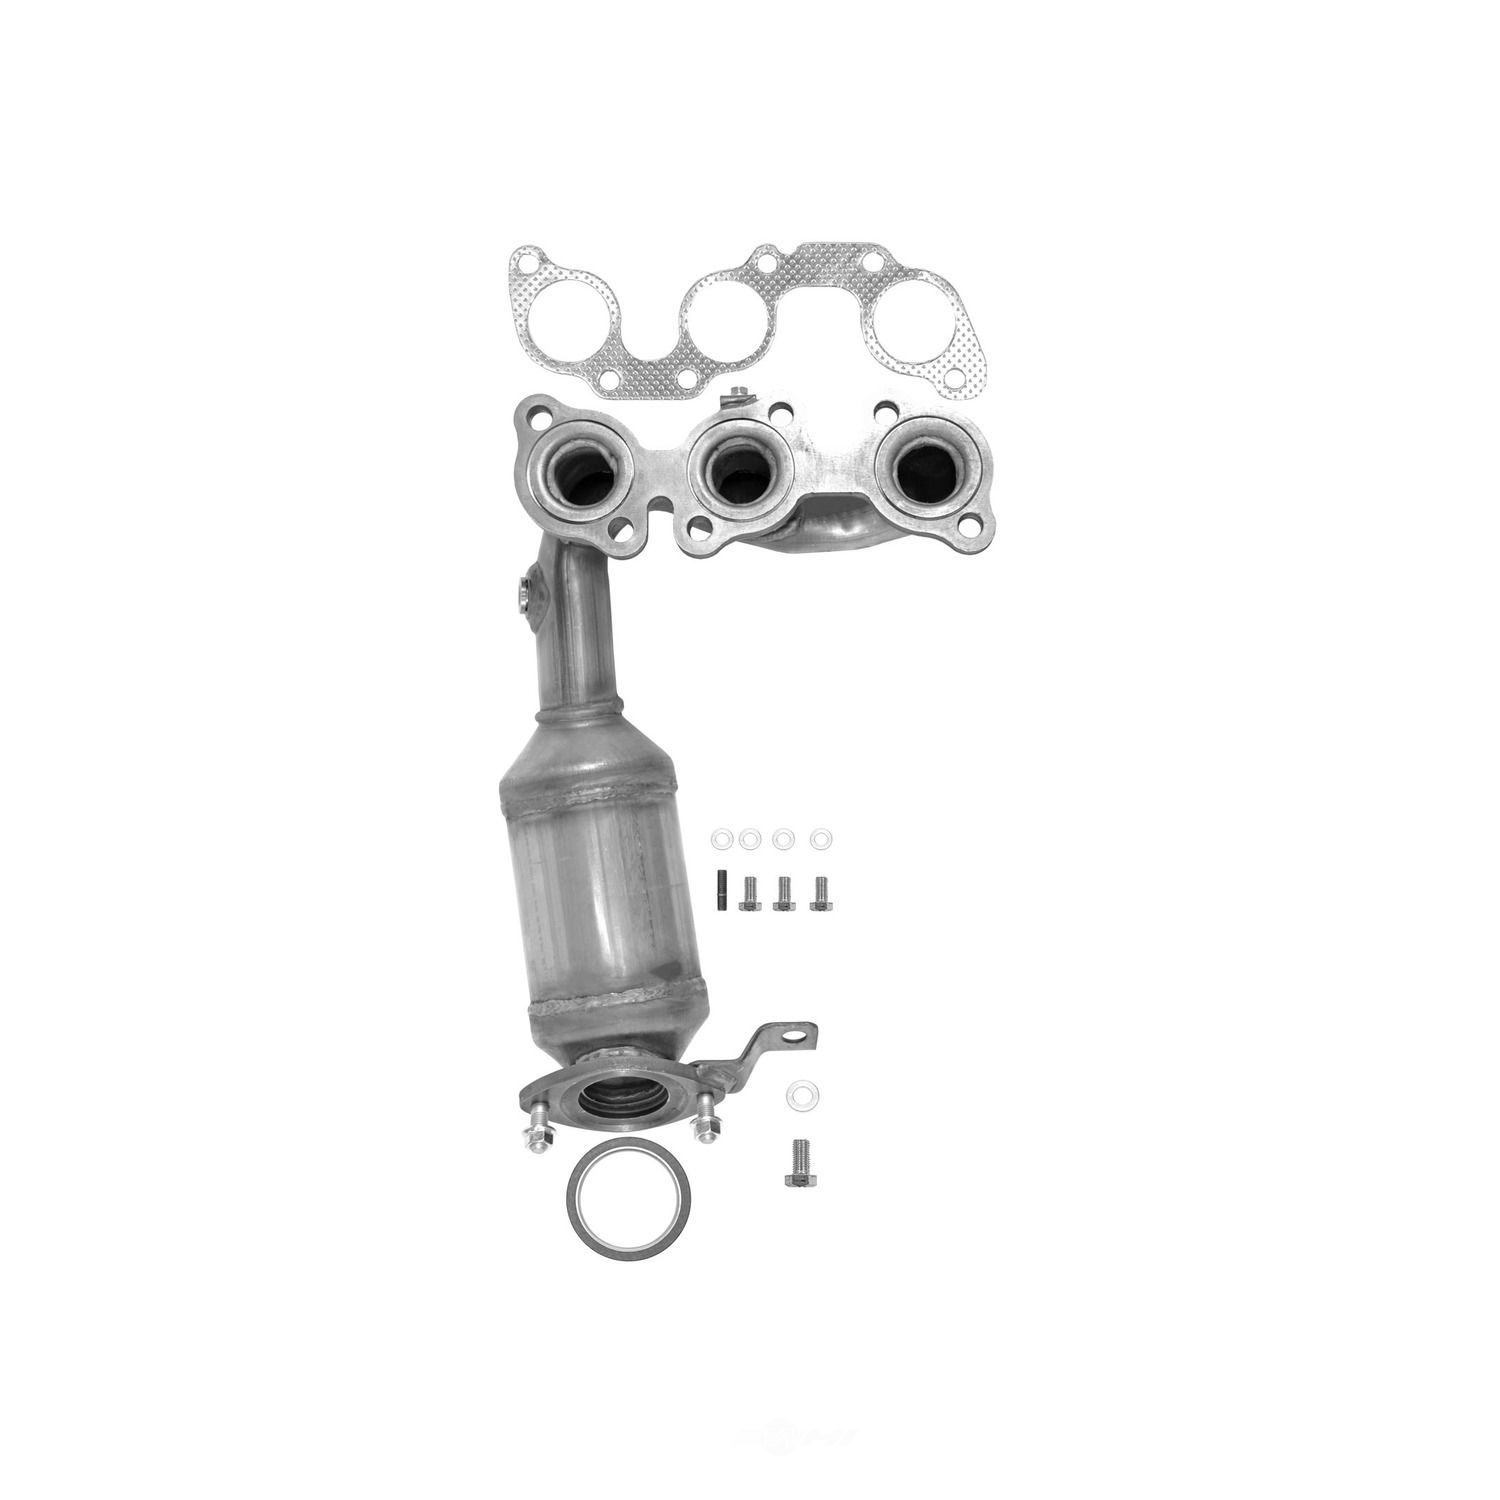 AP EXHAUST W/FEDERAL CONVERTER - Direct Fit Converter w/ Manifold - APF 641238